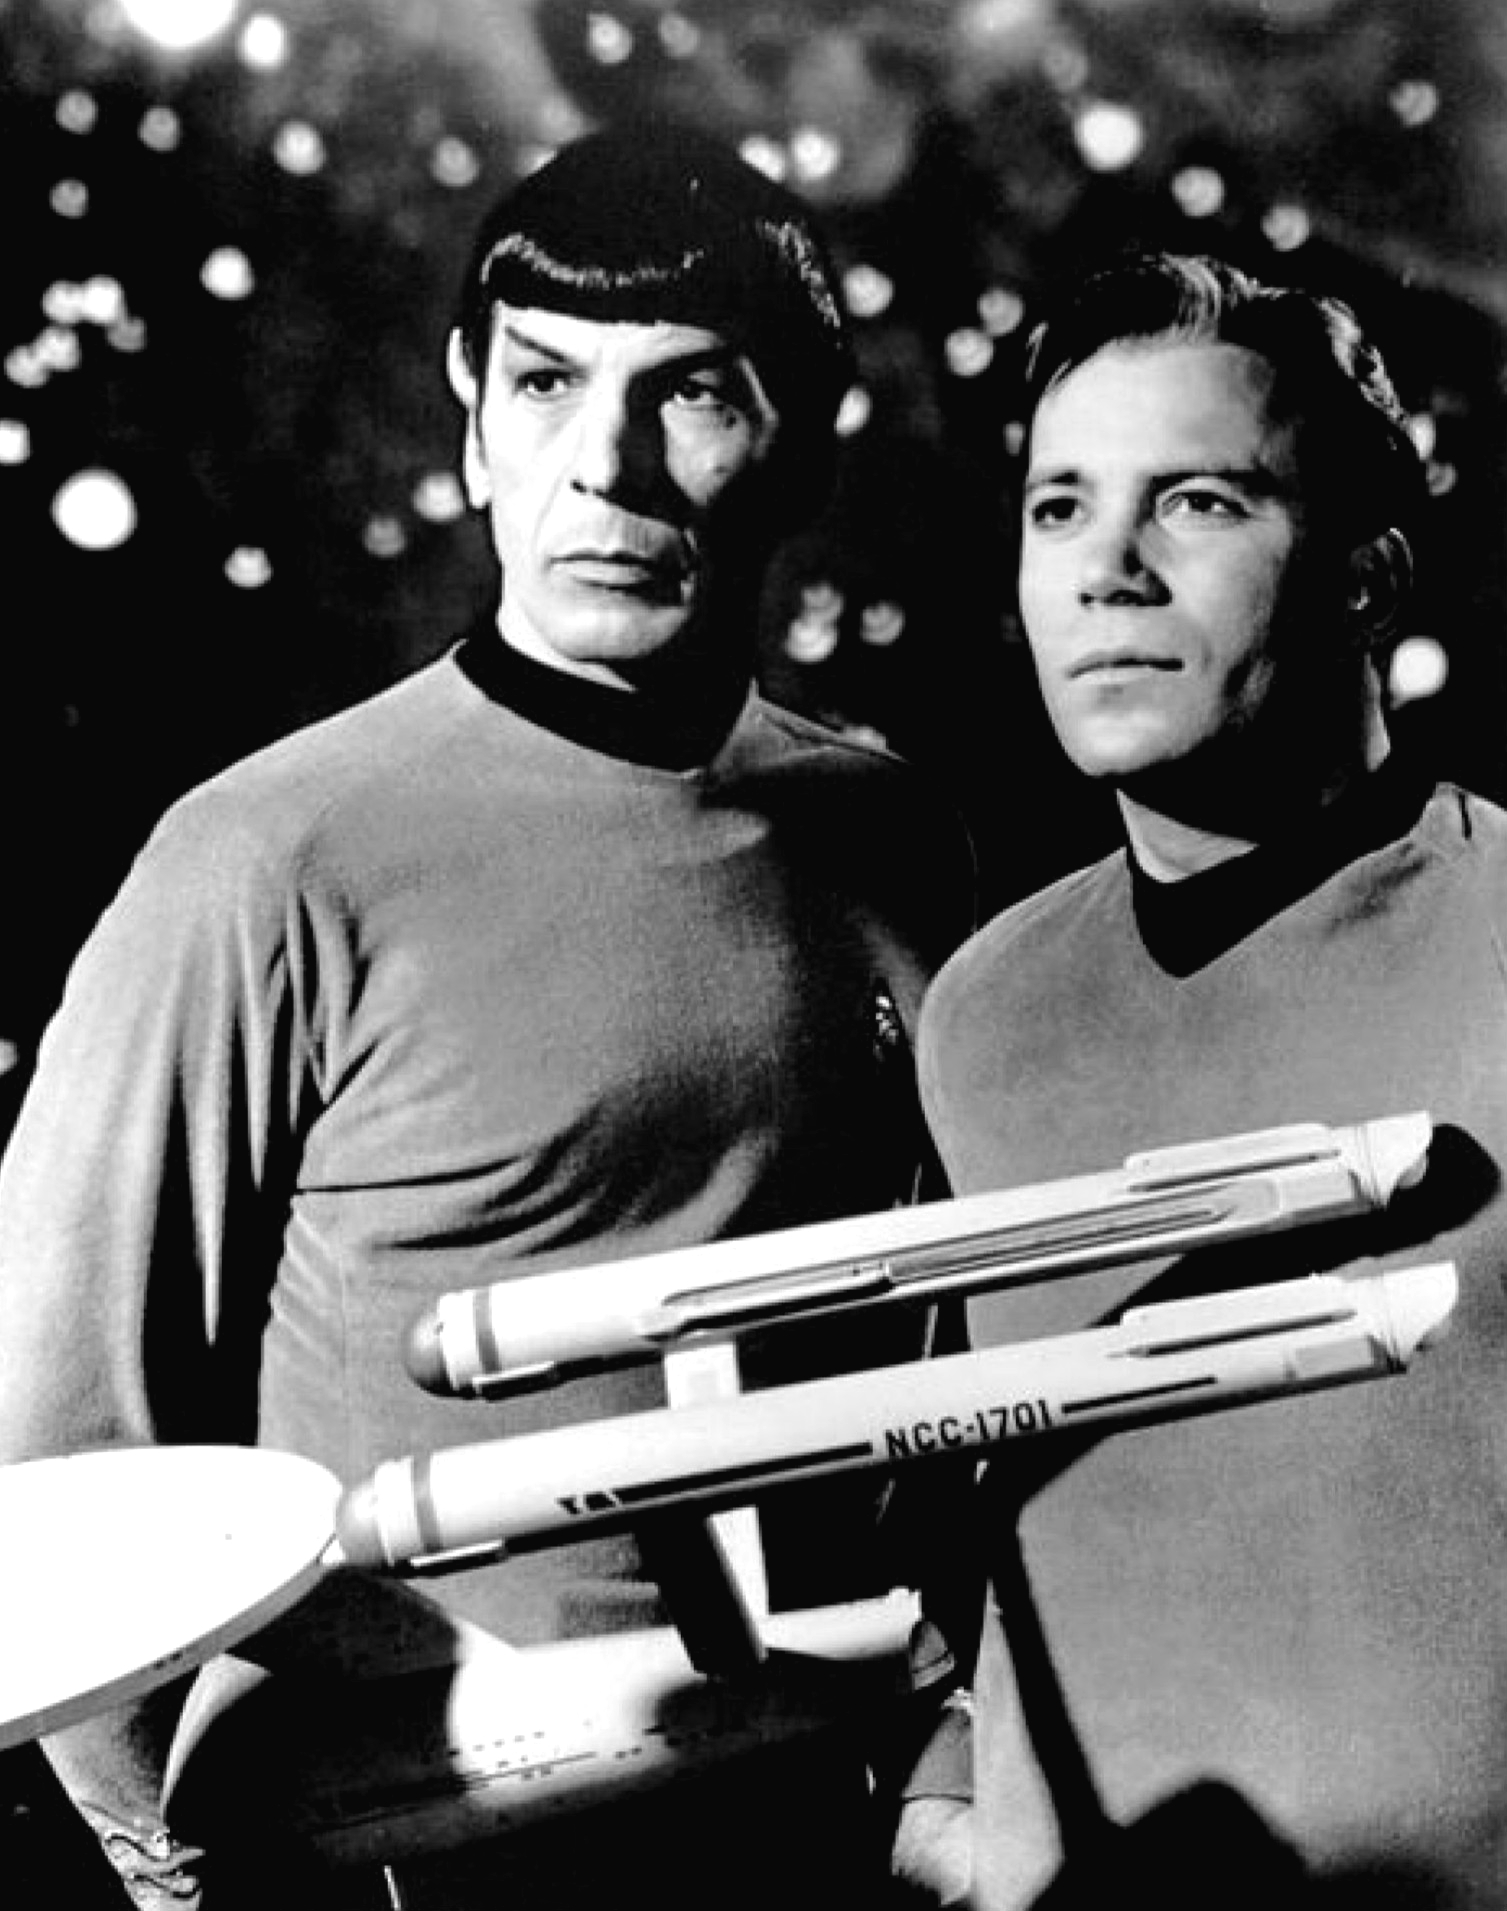 Leonard Nimoy (Mr. Spock) et William Shatner (Captain Kirk), image [NBC Television](https://commons.wikimedia.org/w/index.php?curid=17205358)